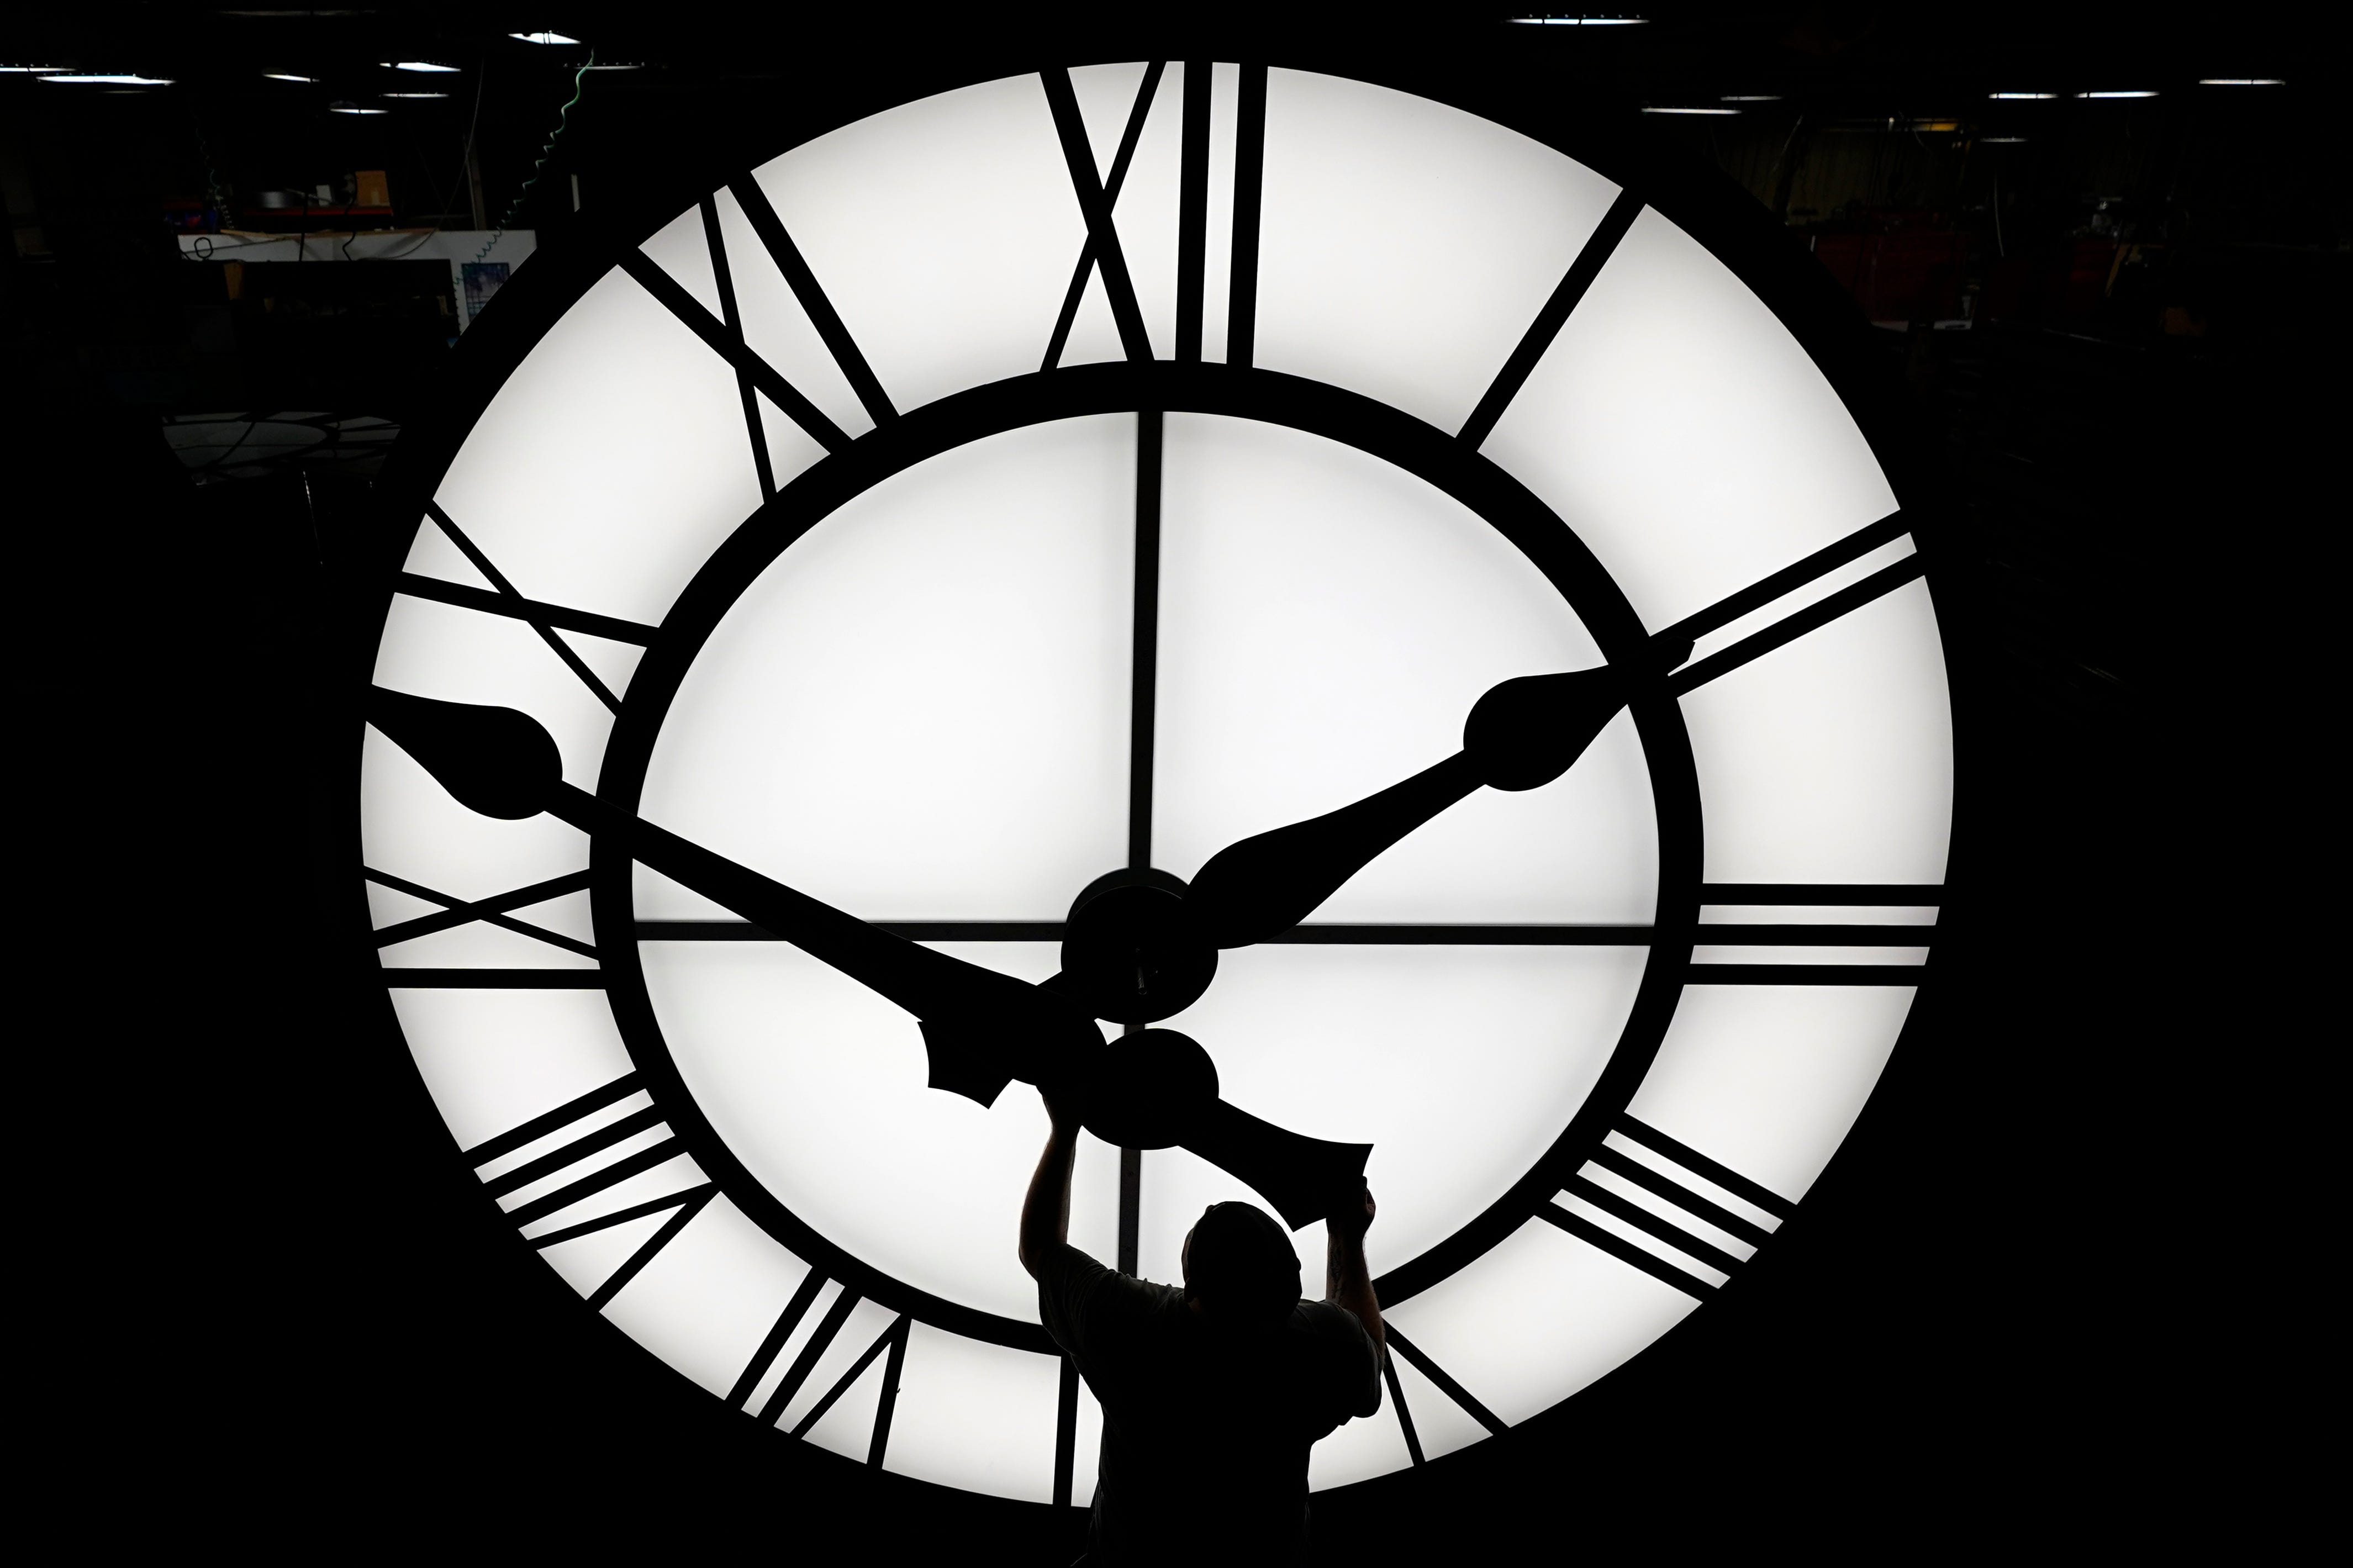 Daylight saving time, also referred to as “spring forward, fall back,” will happen at 2 a.m. Sunday, Nov. 5, in the eastern United States.